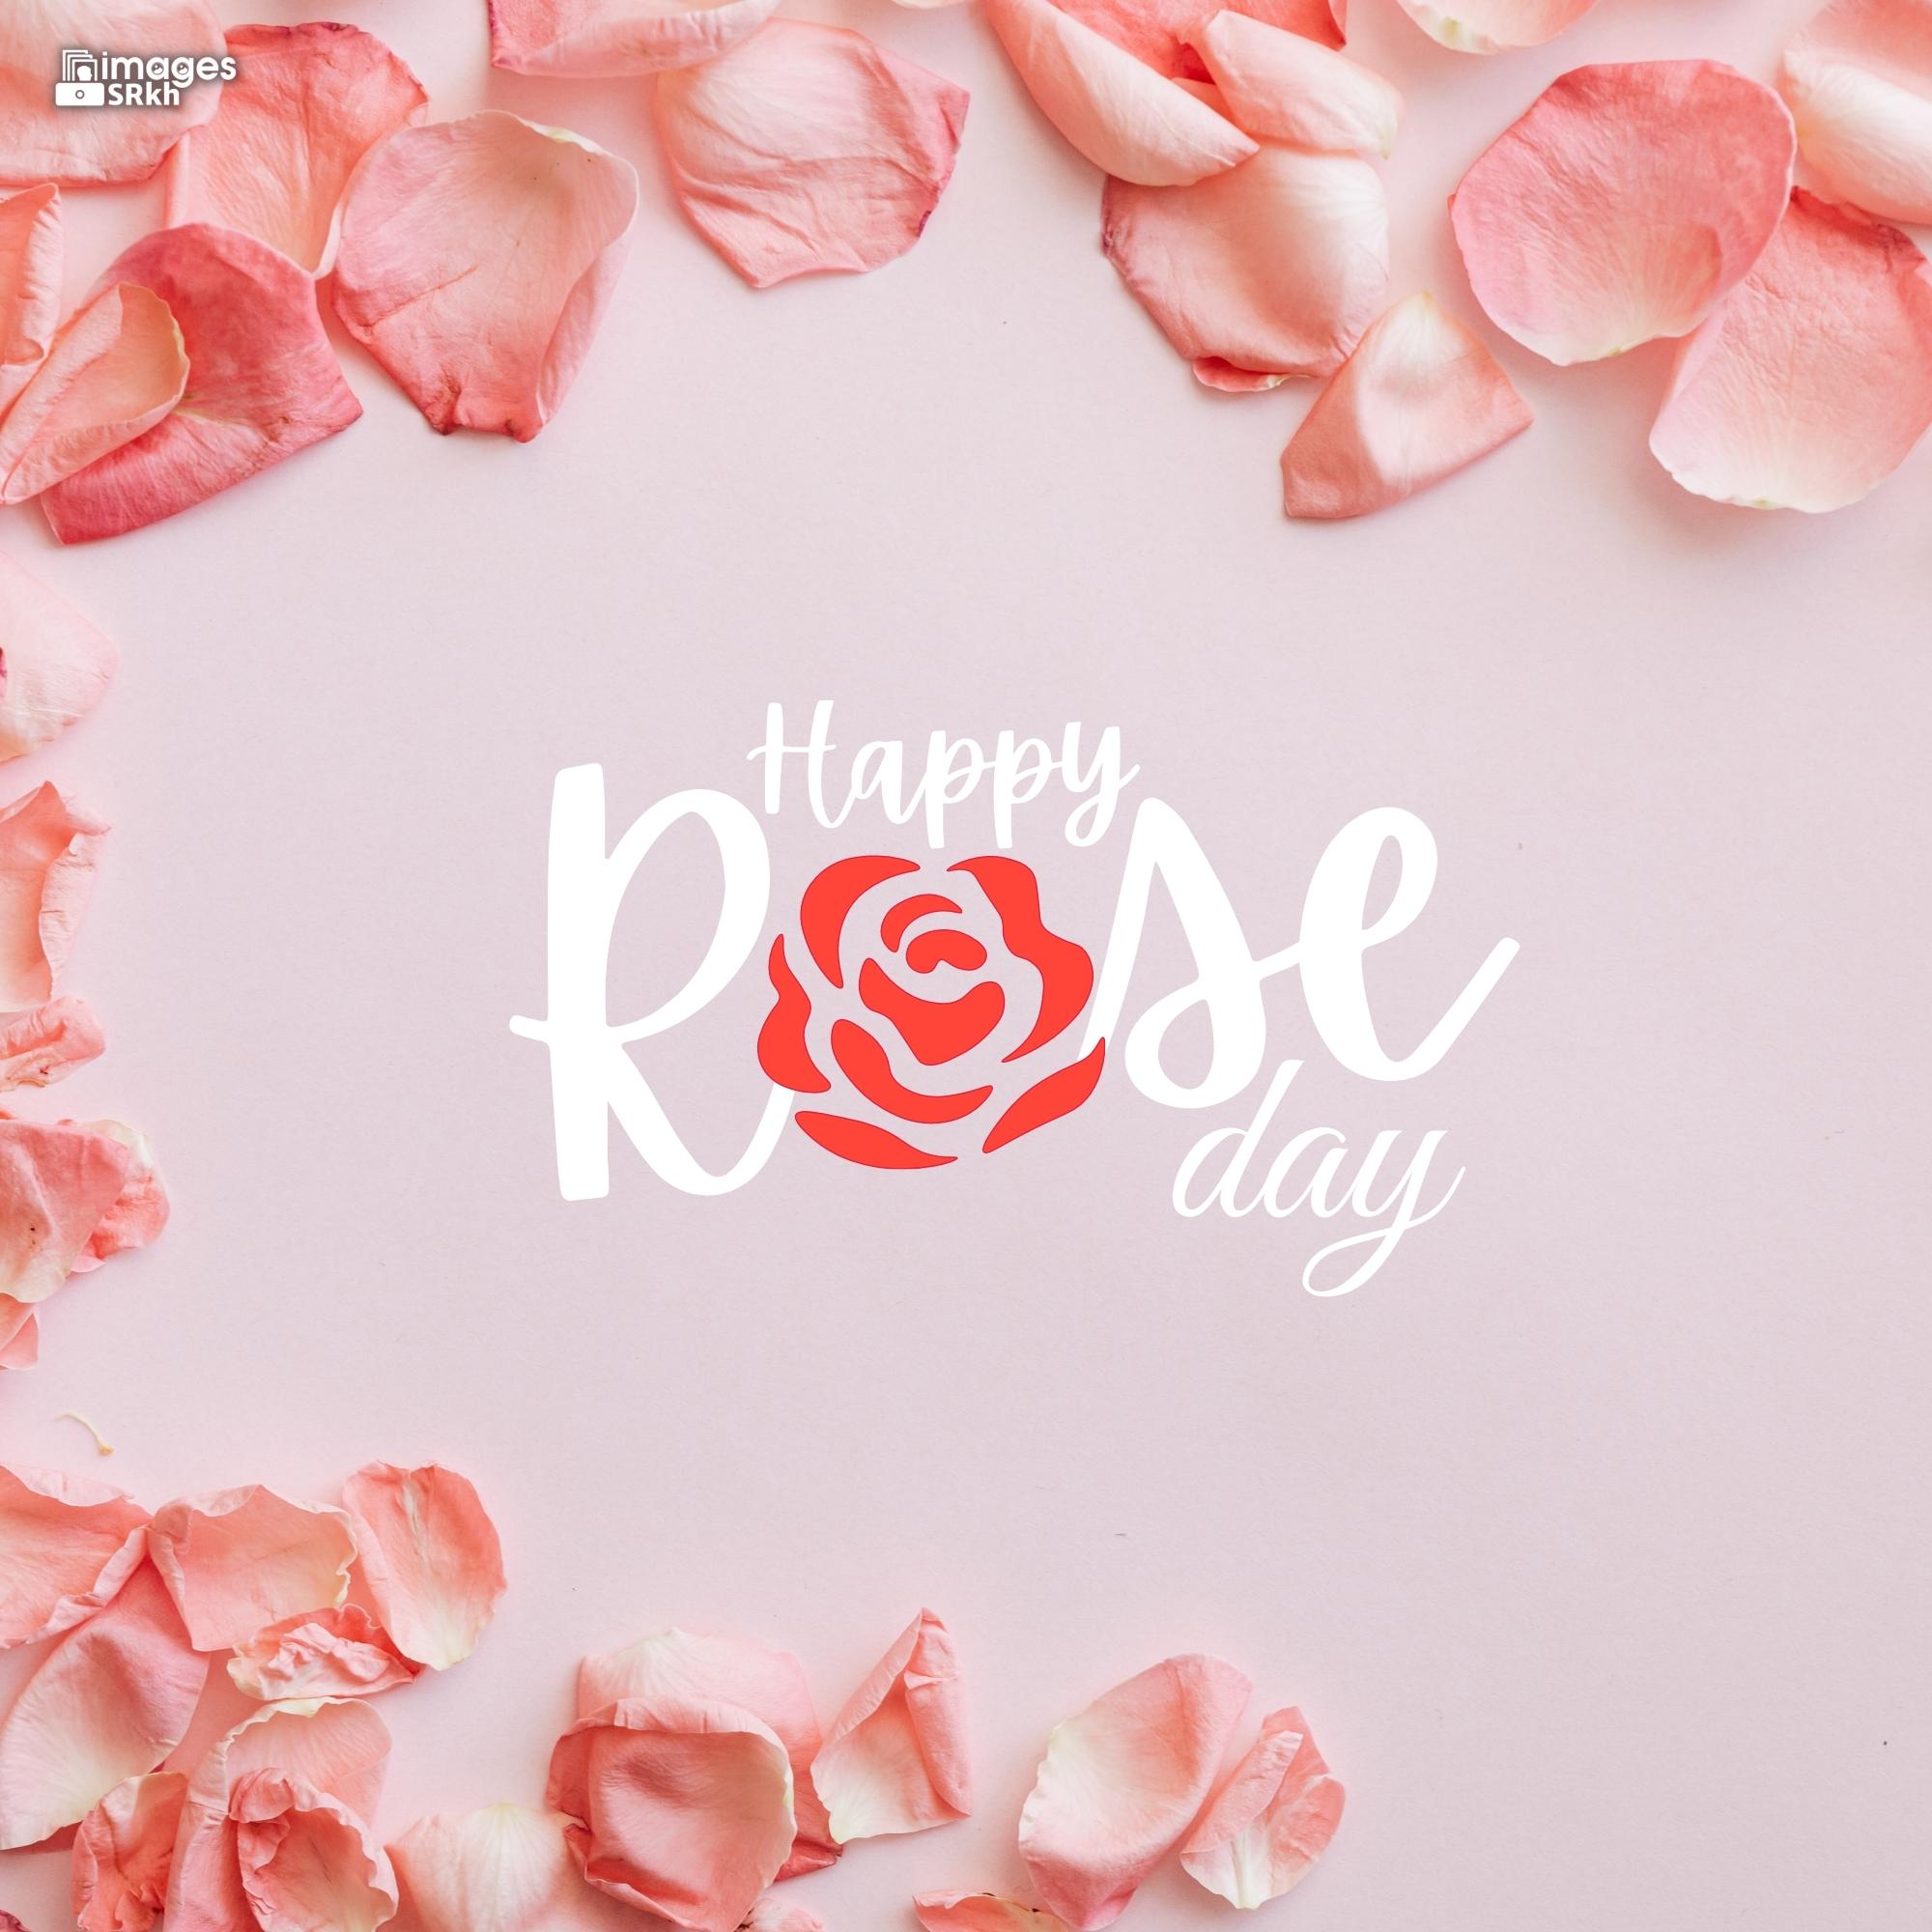 Happy Rose Day Image Hd Download (15)